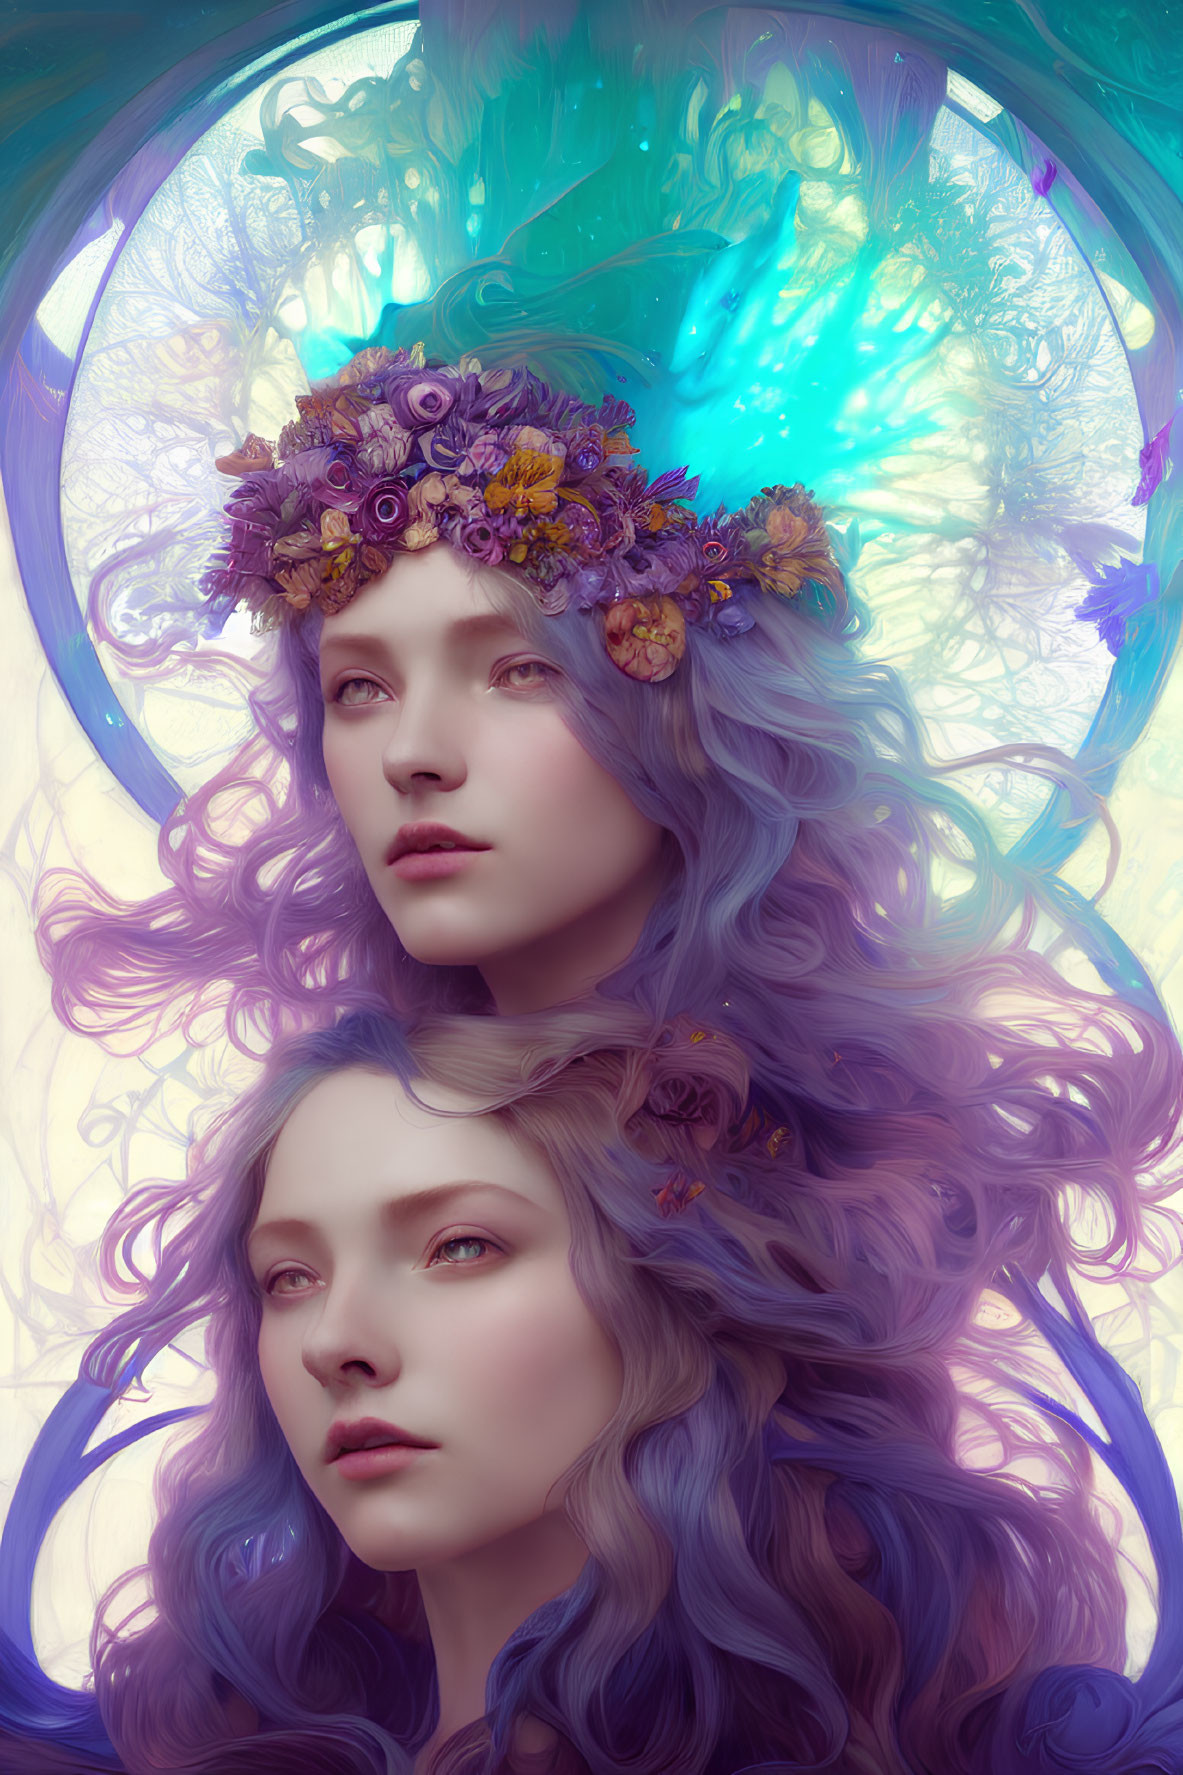 Ethereal women with lilac hair and floral crowns in mystical setting